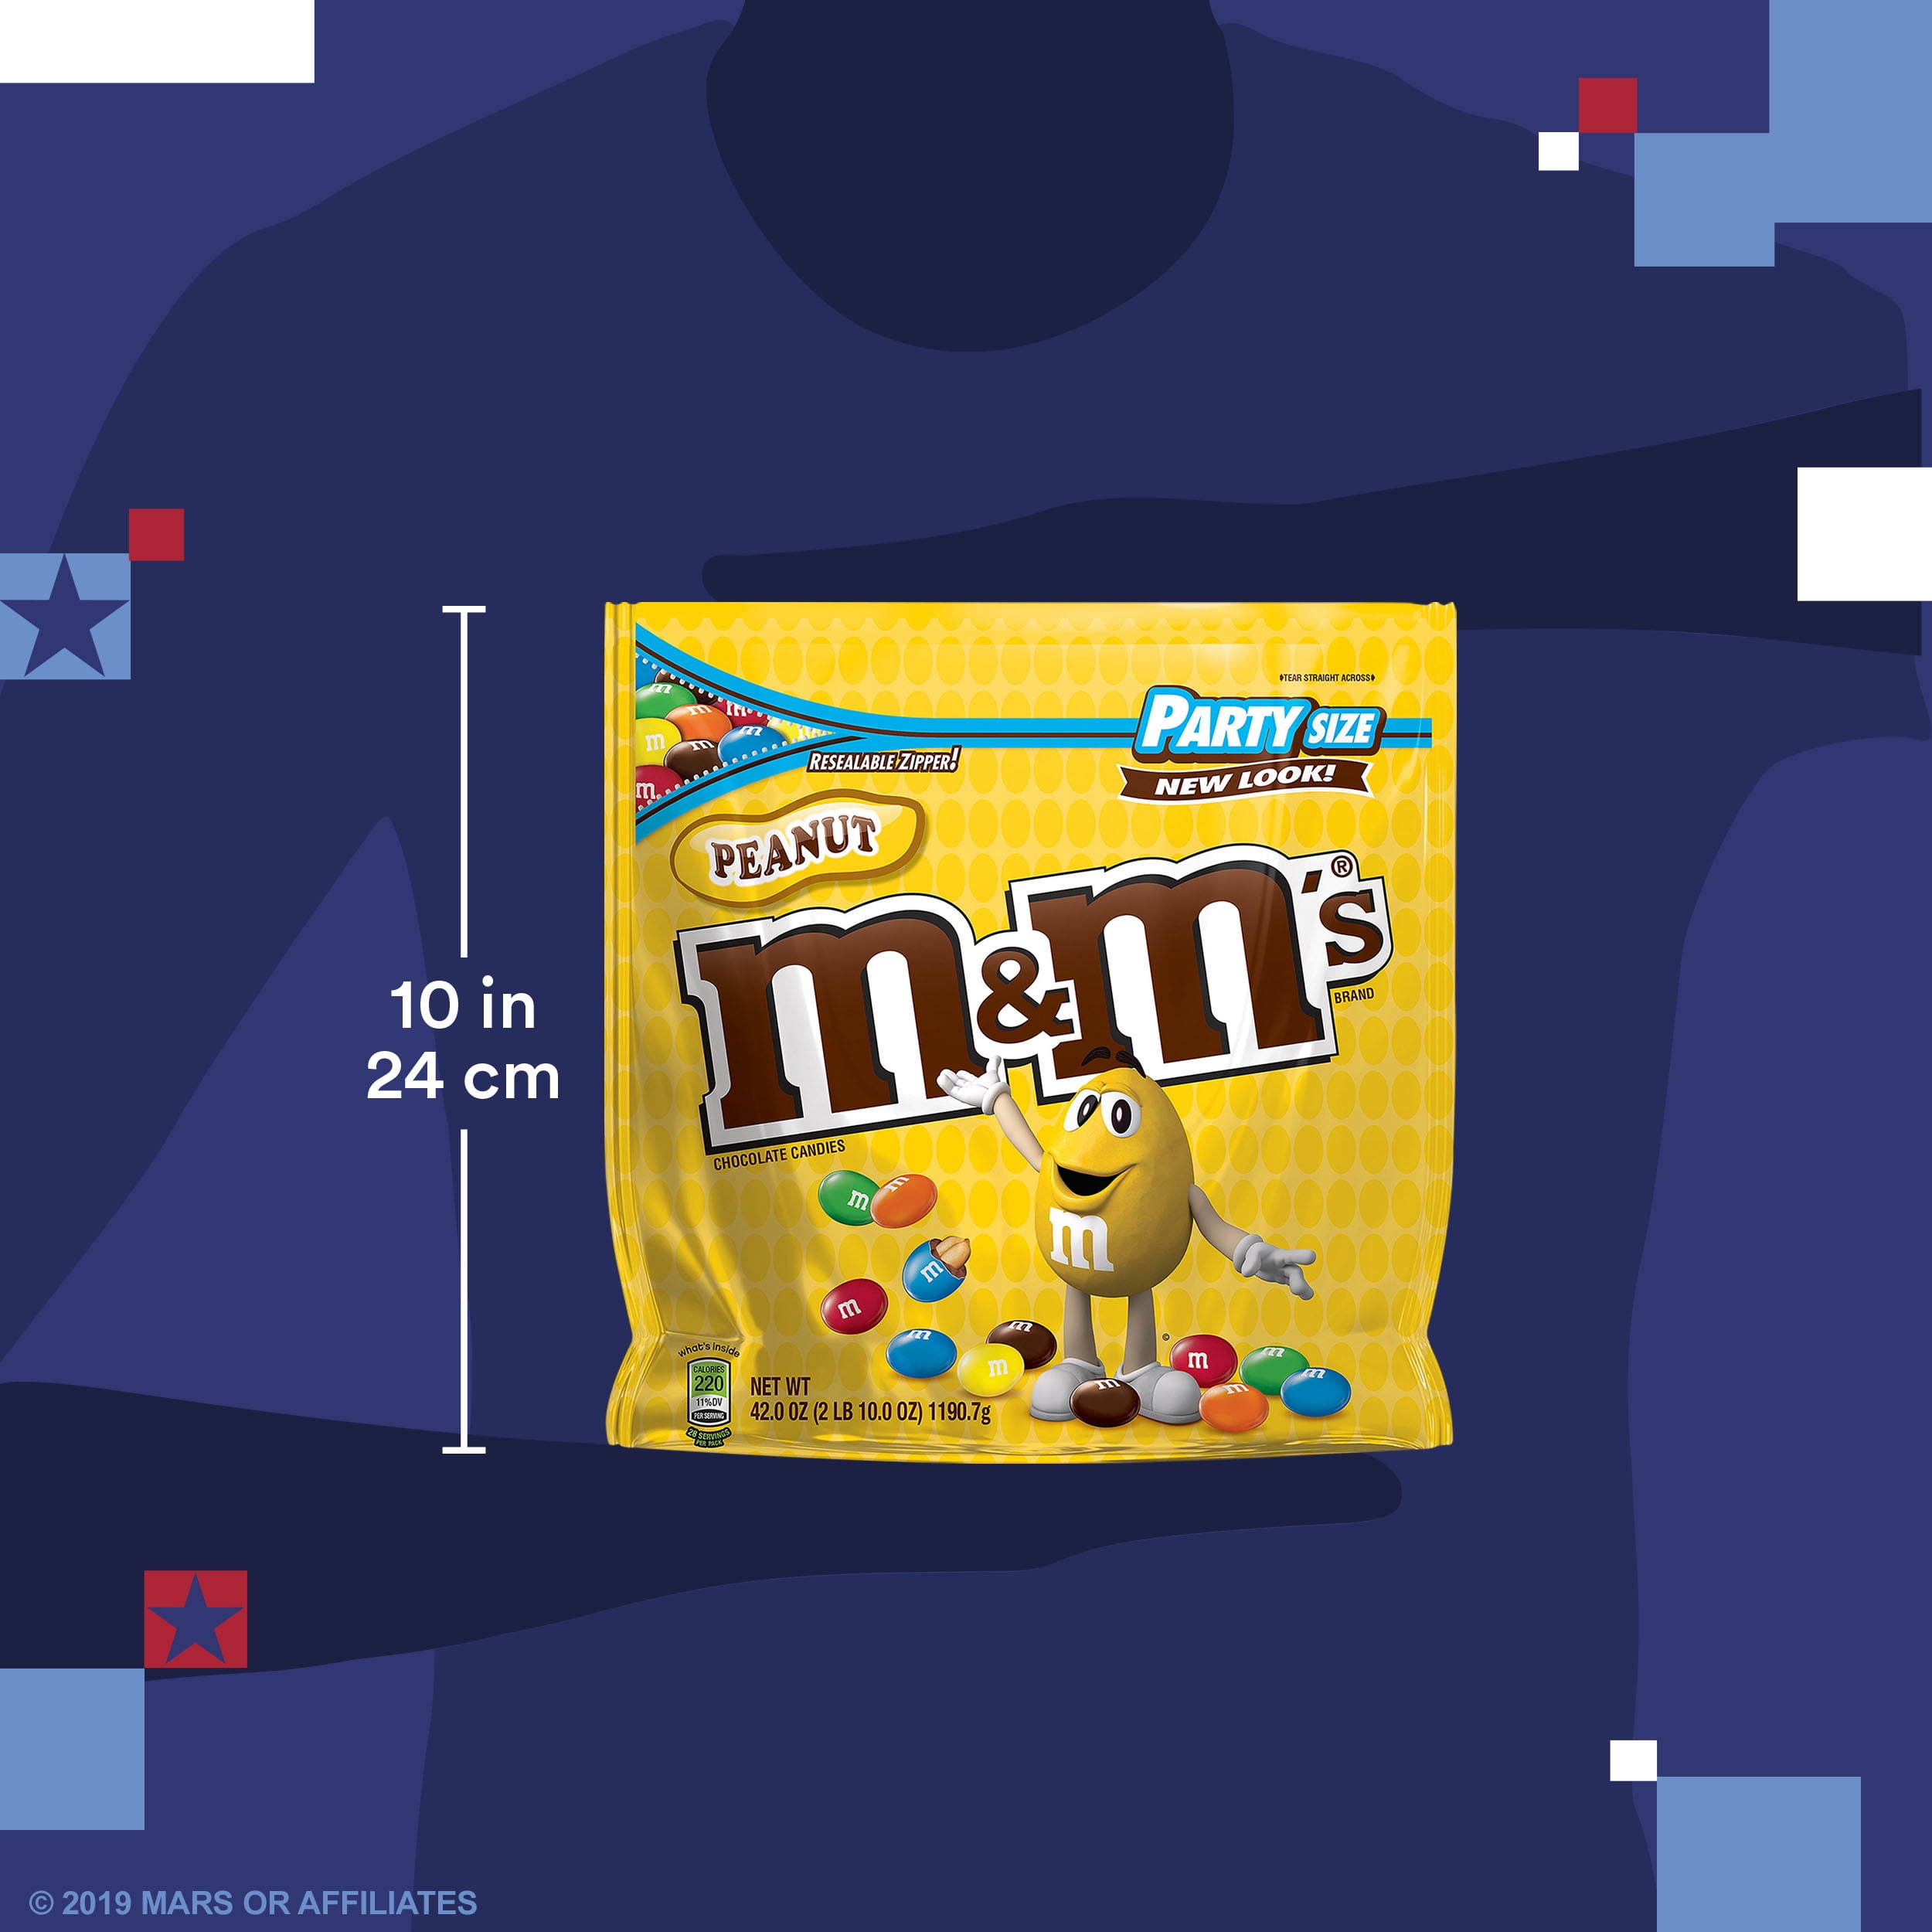 Lot - Peanut butter M&Ms party size bag 2lbs